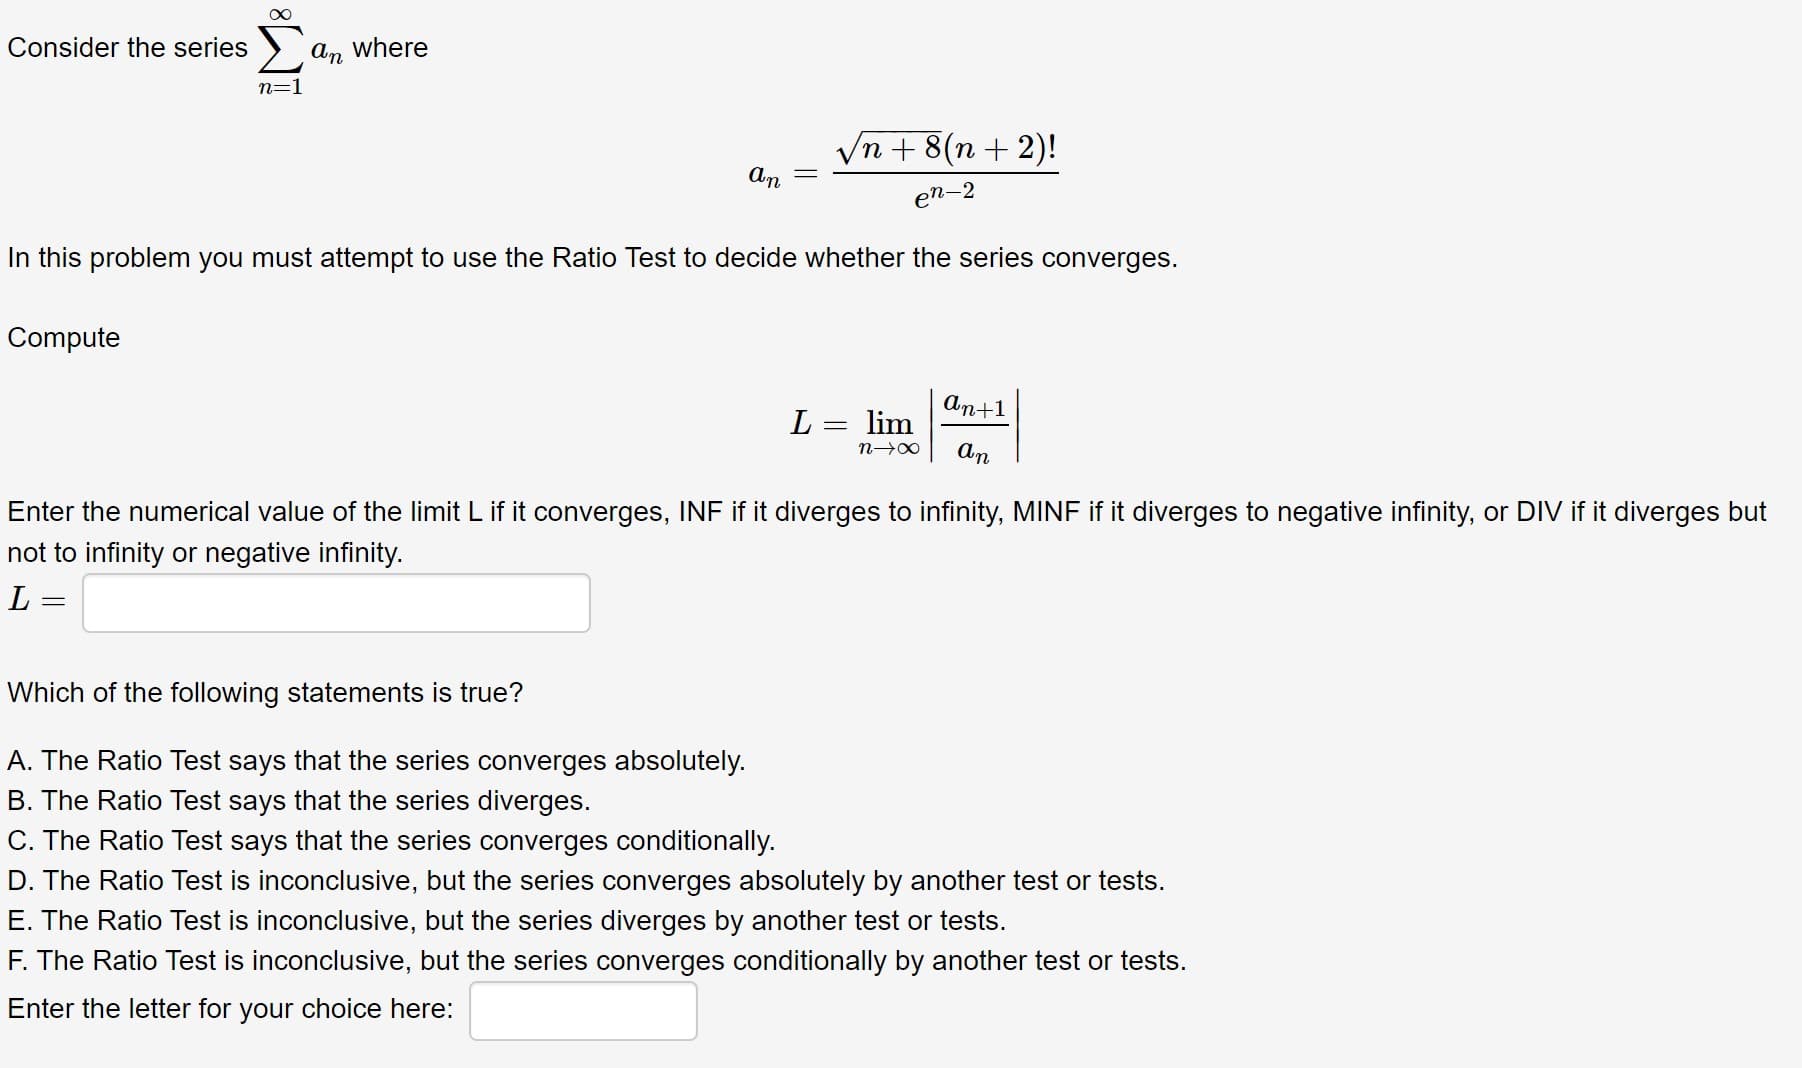 Consider the series
an where
Vn + 8(n + 2)!
An
en-2
In this problem you must attempt to use the Ratio Test to decide whether the series converges.
Compute
An+1
L = lim
An
Enter the numerical value of the limit L if it converges, INF if it diverges to infinity, MINF if it diverges to negative infinity, or DIV if it diverges but
not to infinity or negative infinity.
L =
Which of the following statements is true?
WI
